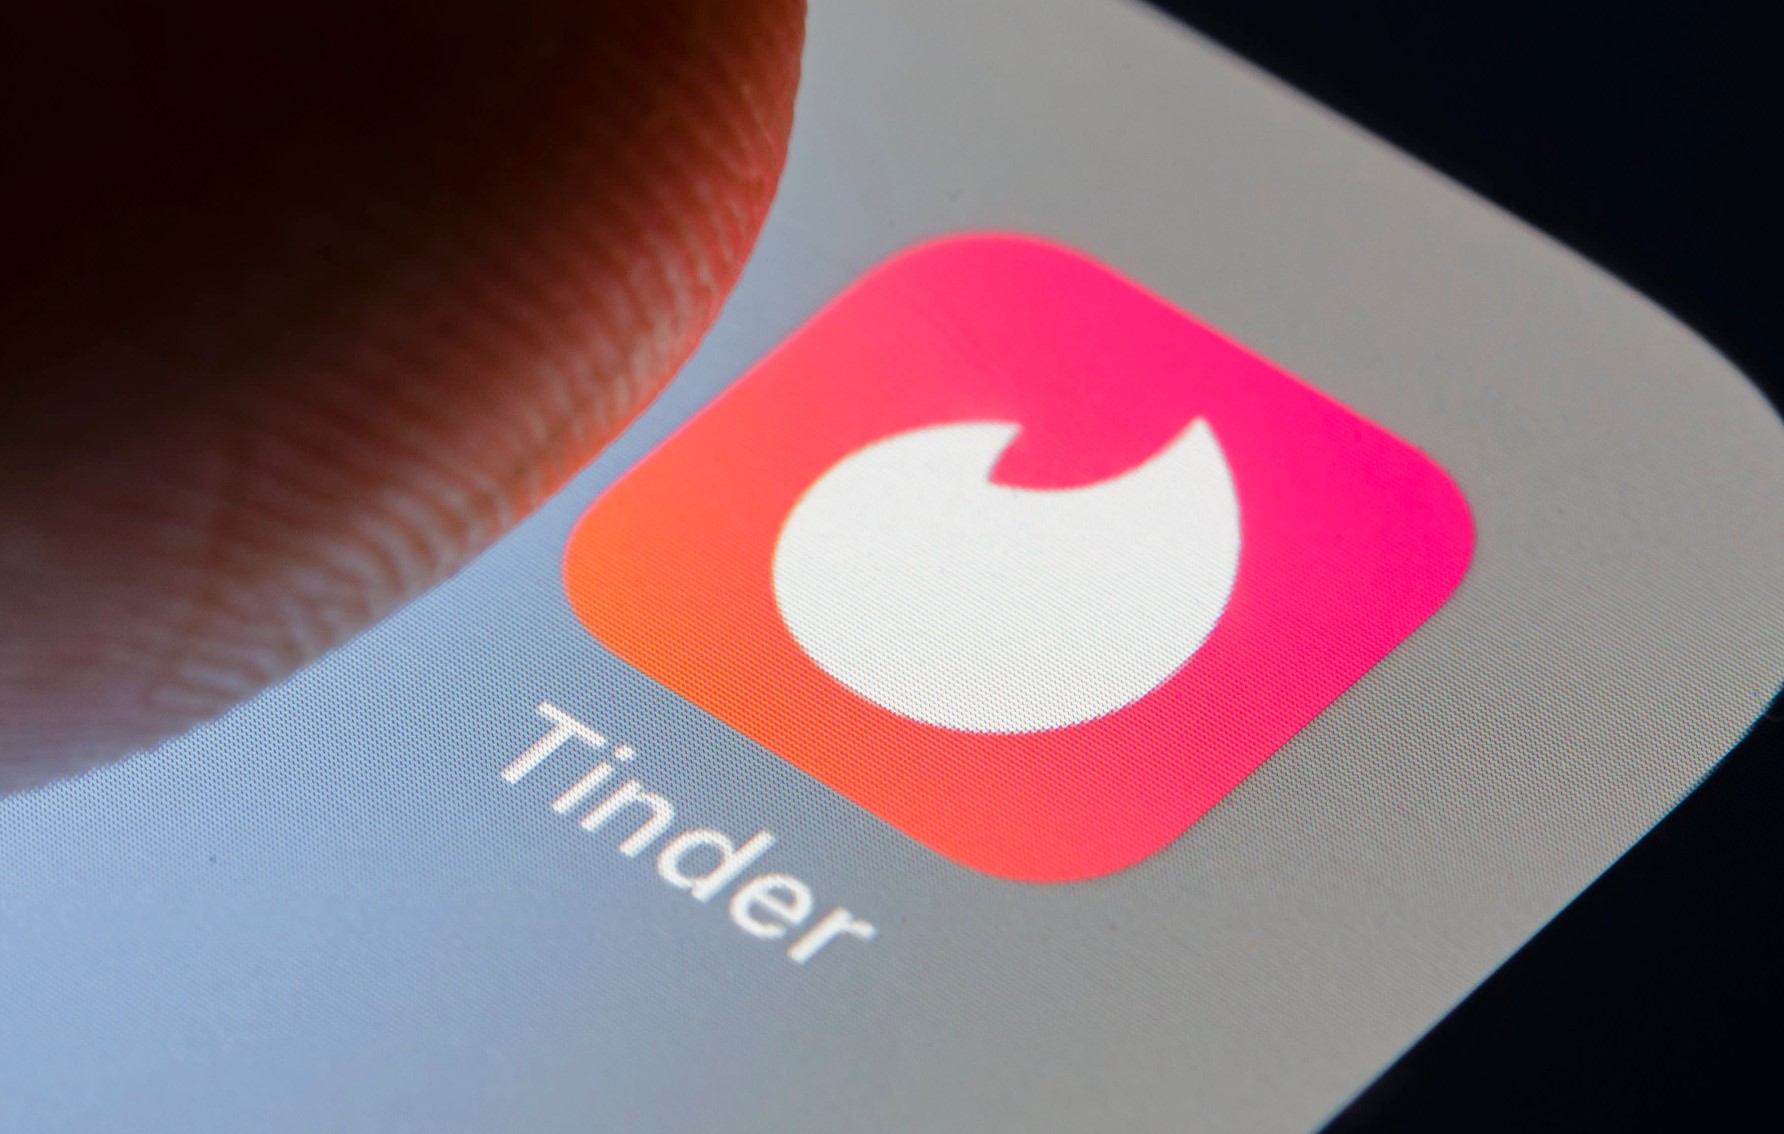 Overview of Tinder